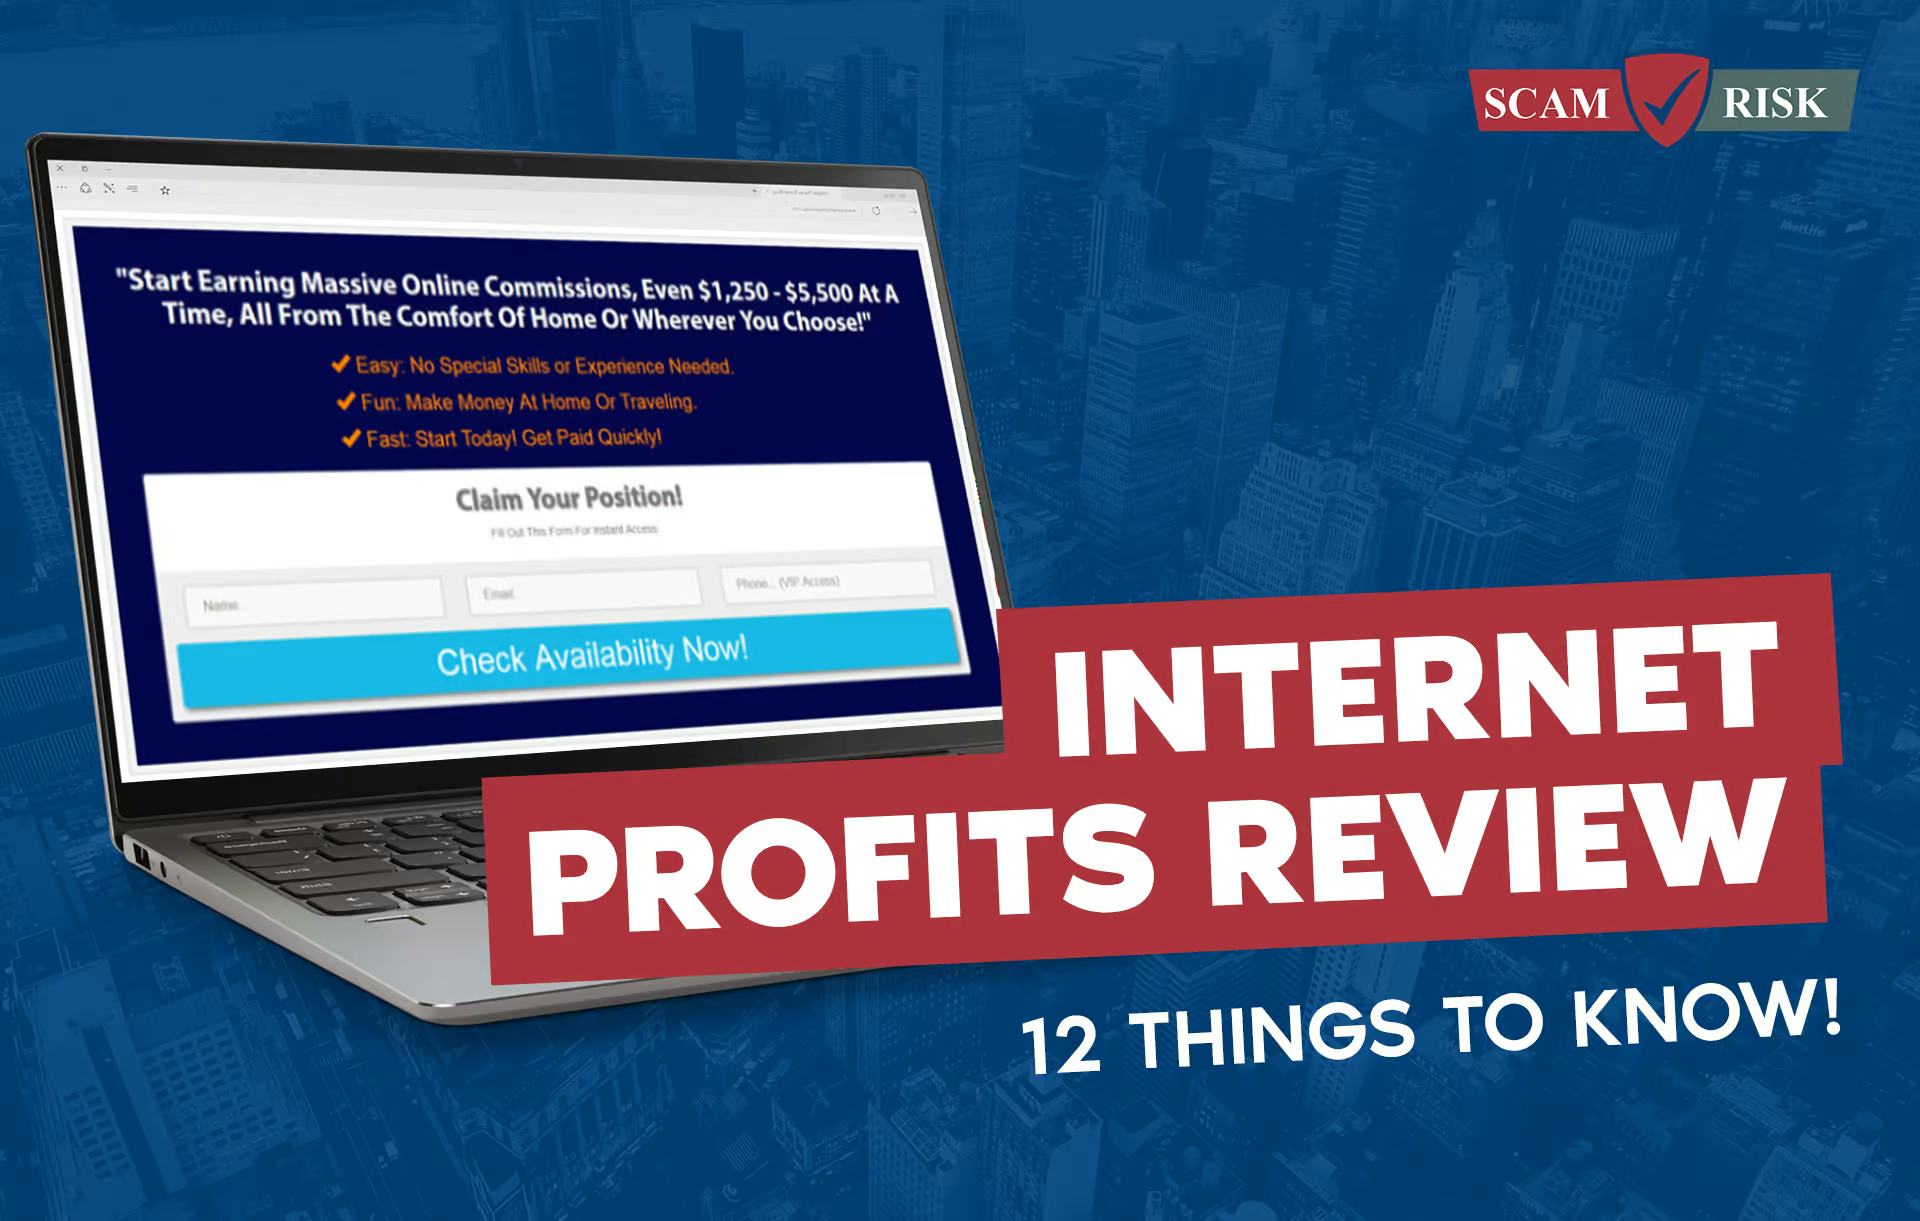 Internet Profits Reviews: 12 Things To Know